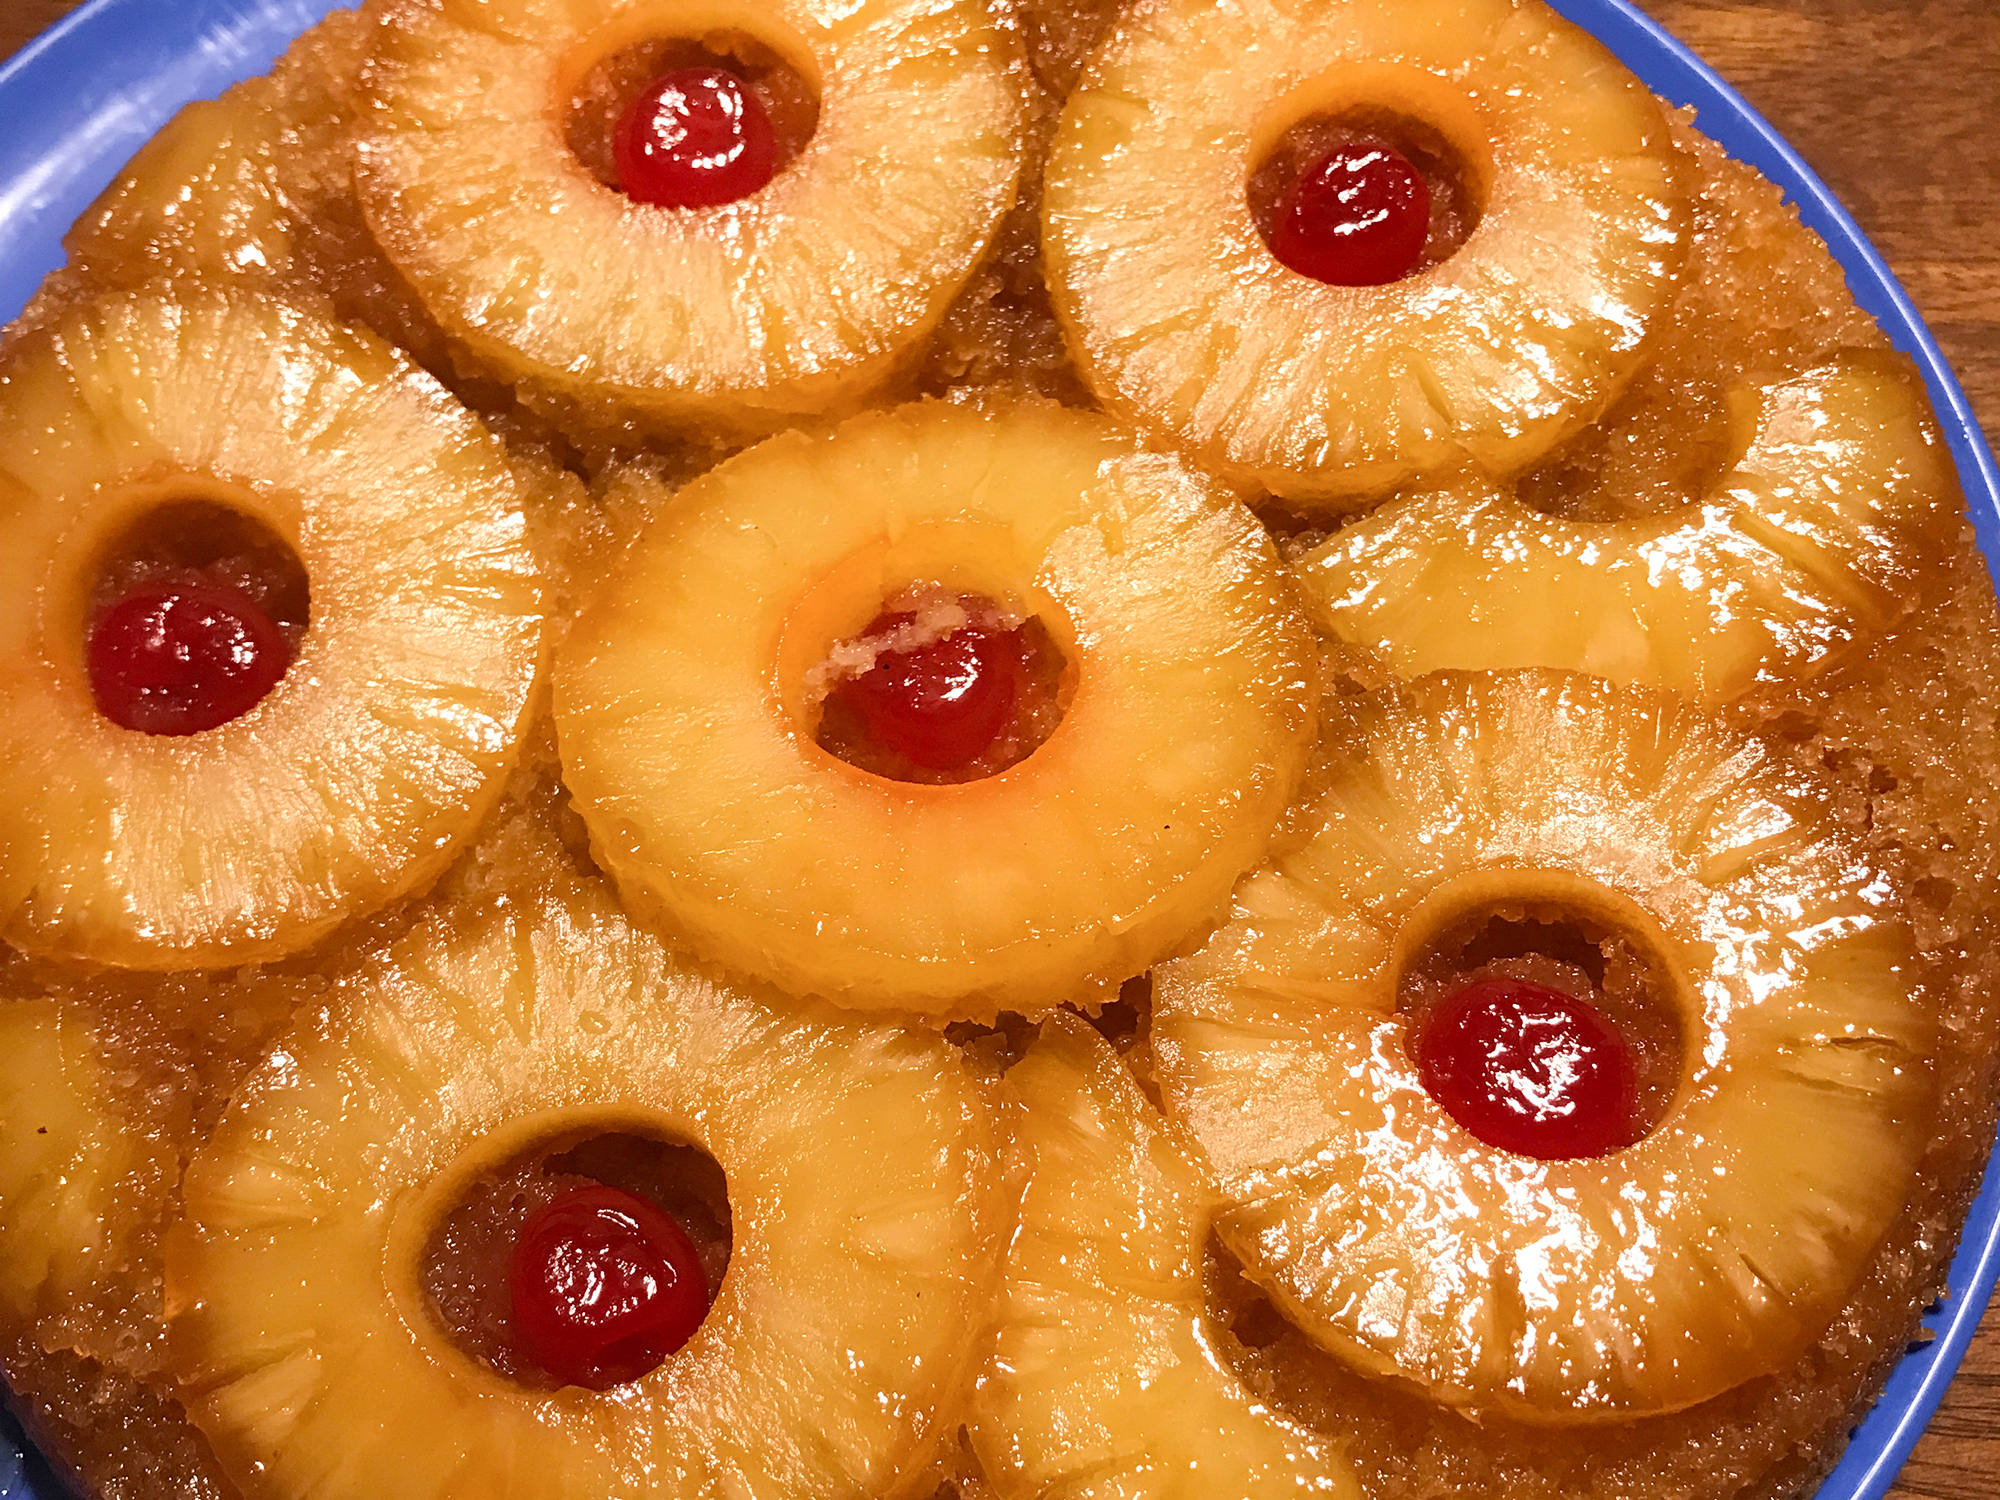 close up view of Pineapple Upside-Down Cake garnished with pineapple slices and Maraschino cherries on a blue plate